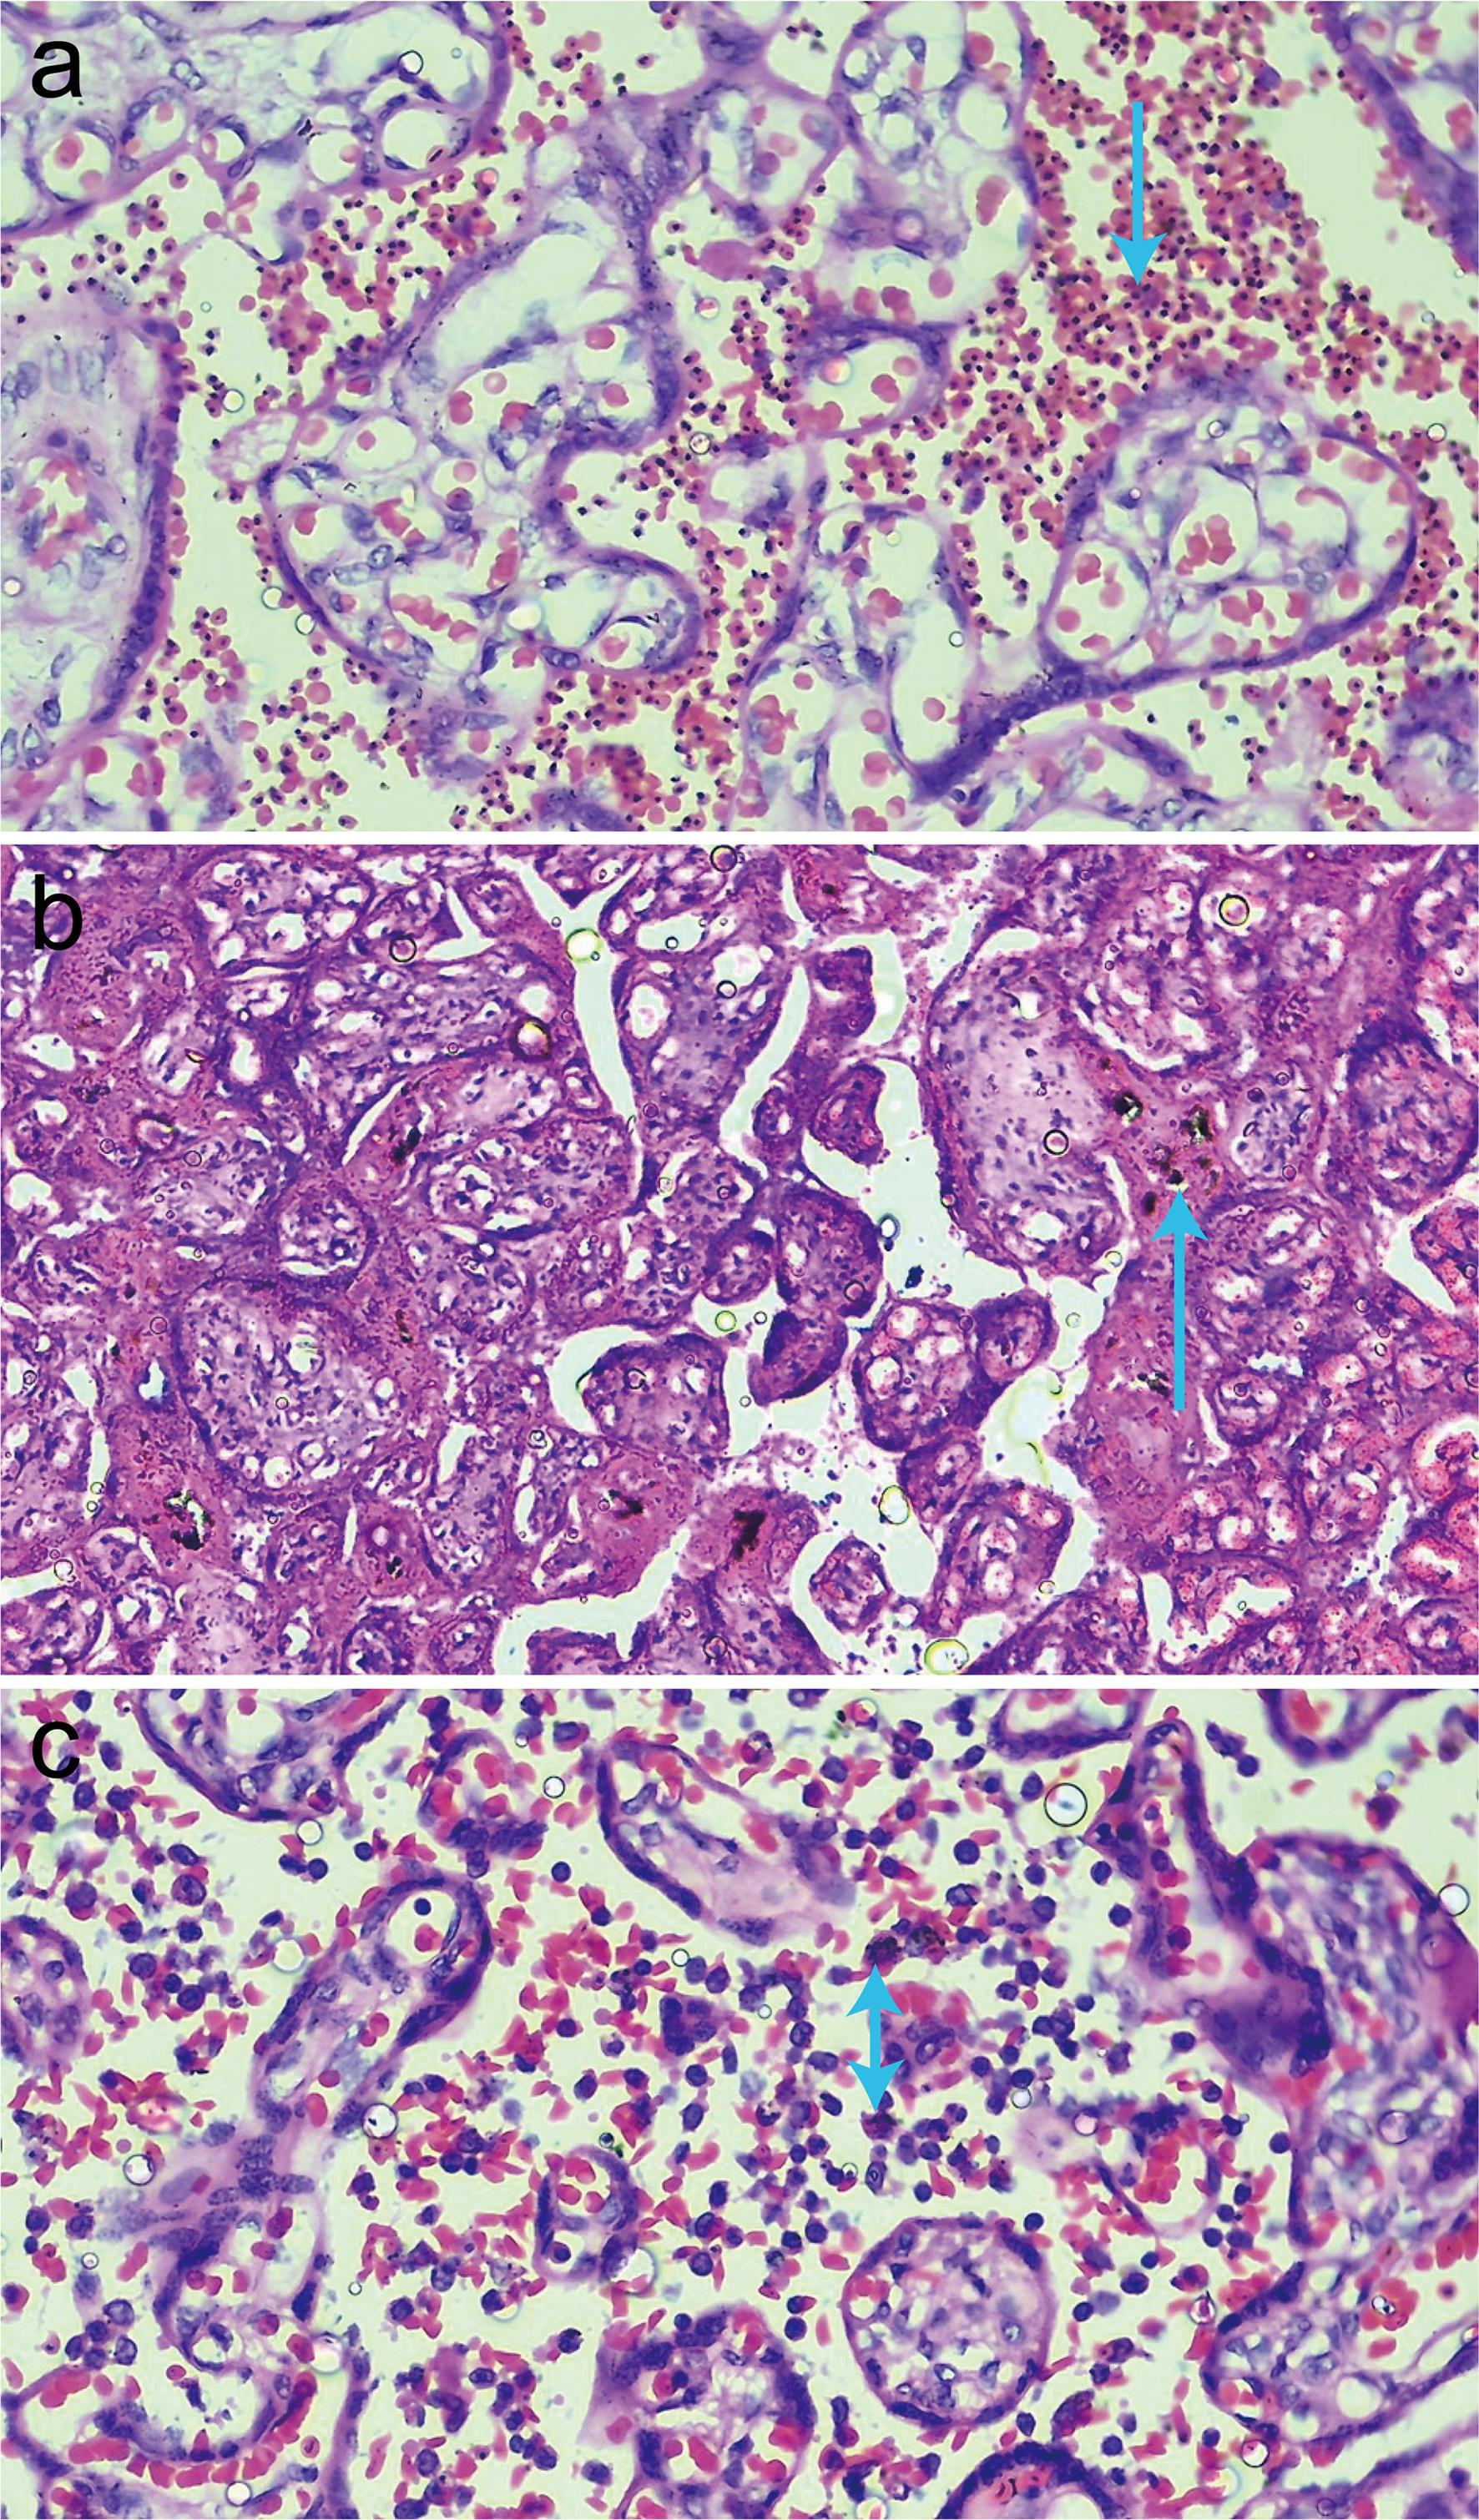 Histological slides showing different types of placental malaria.